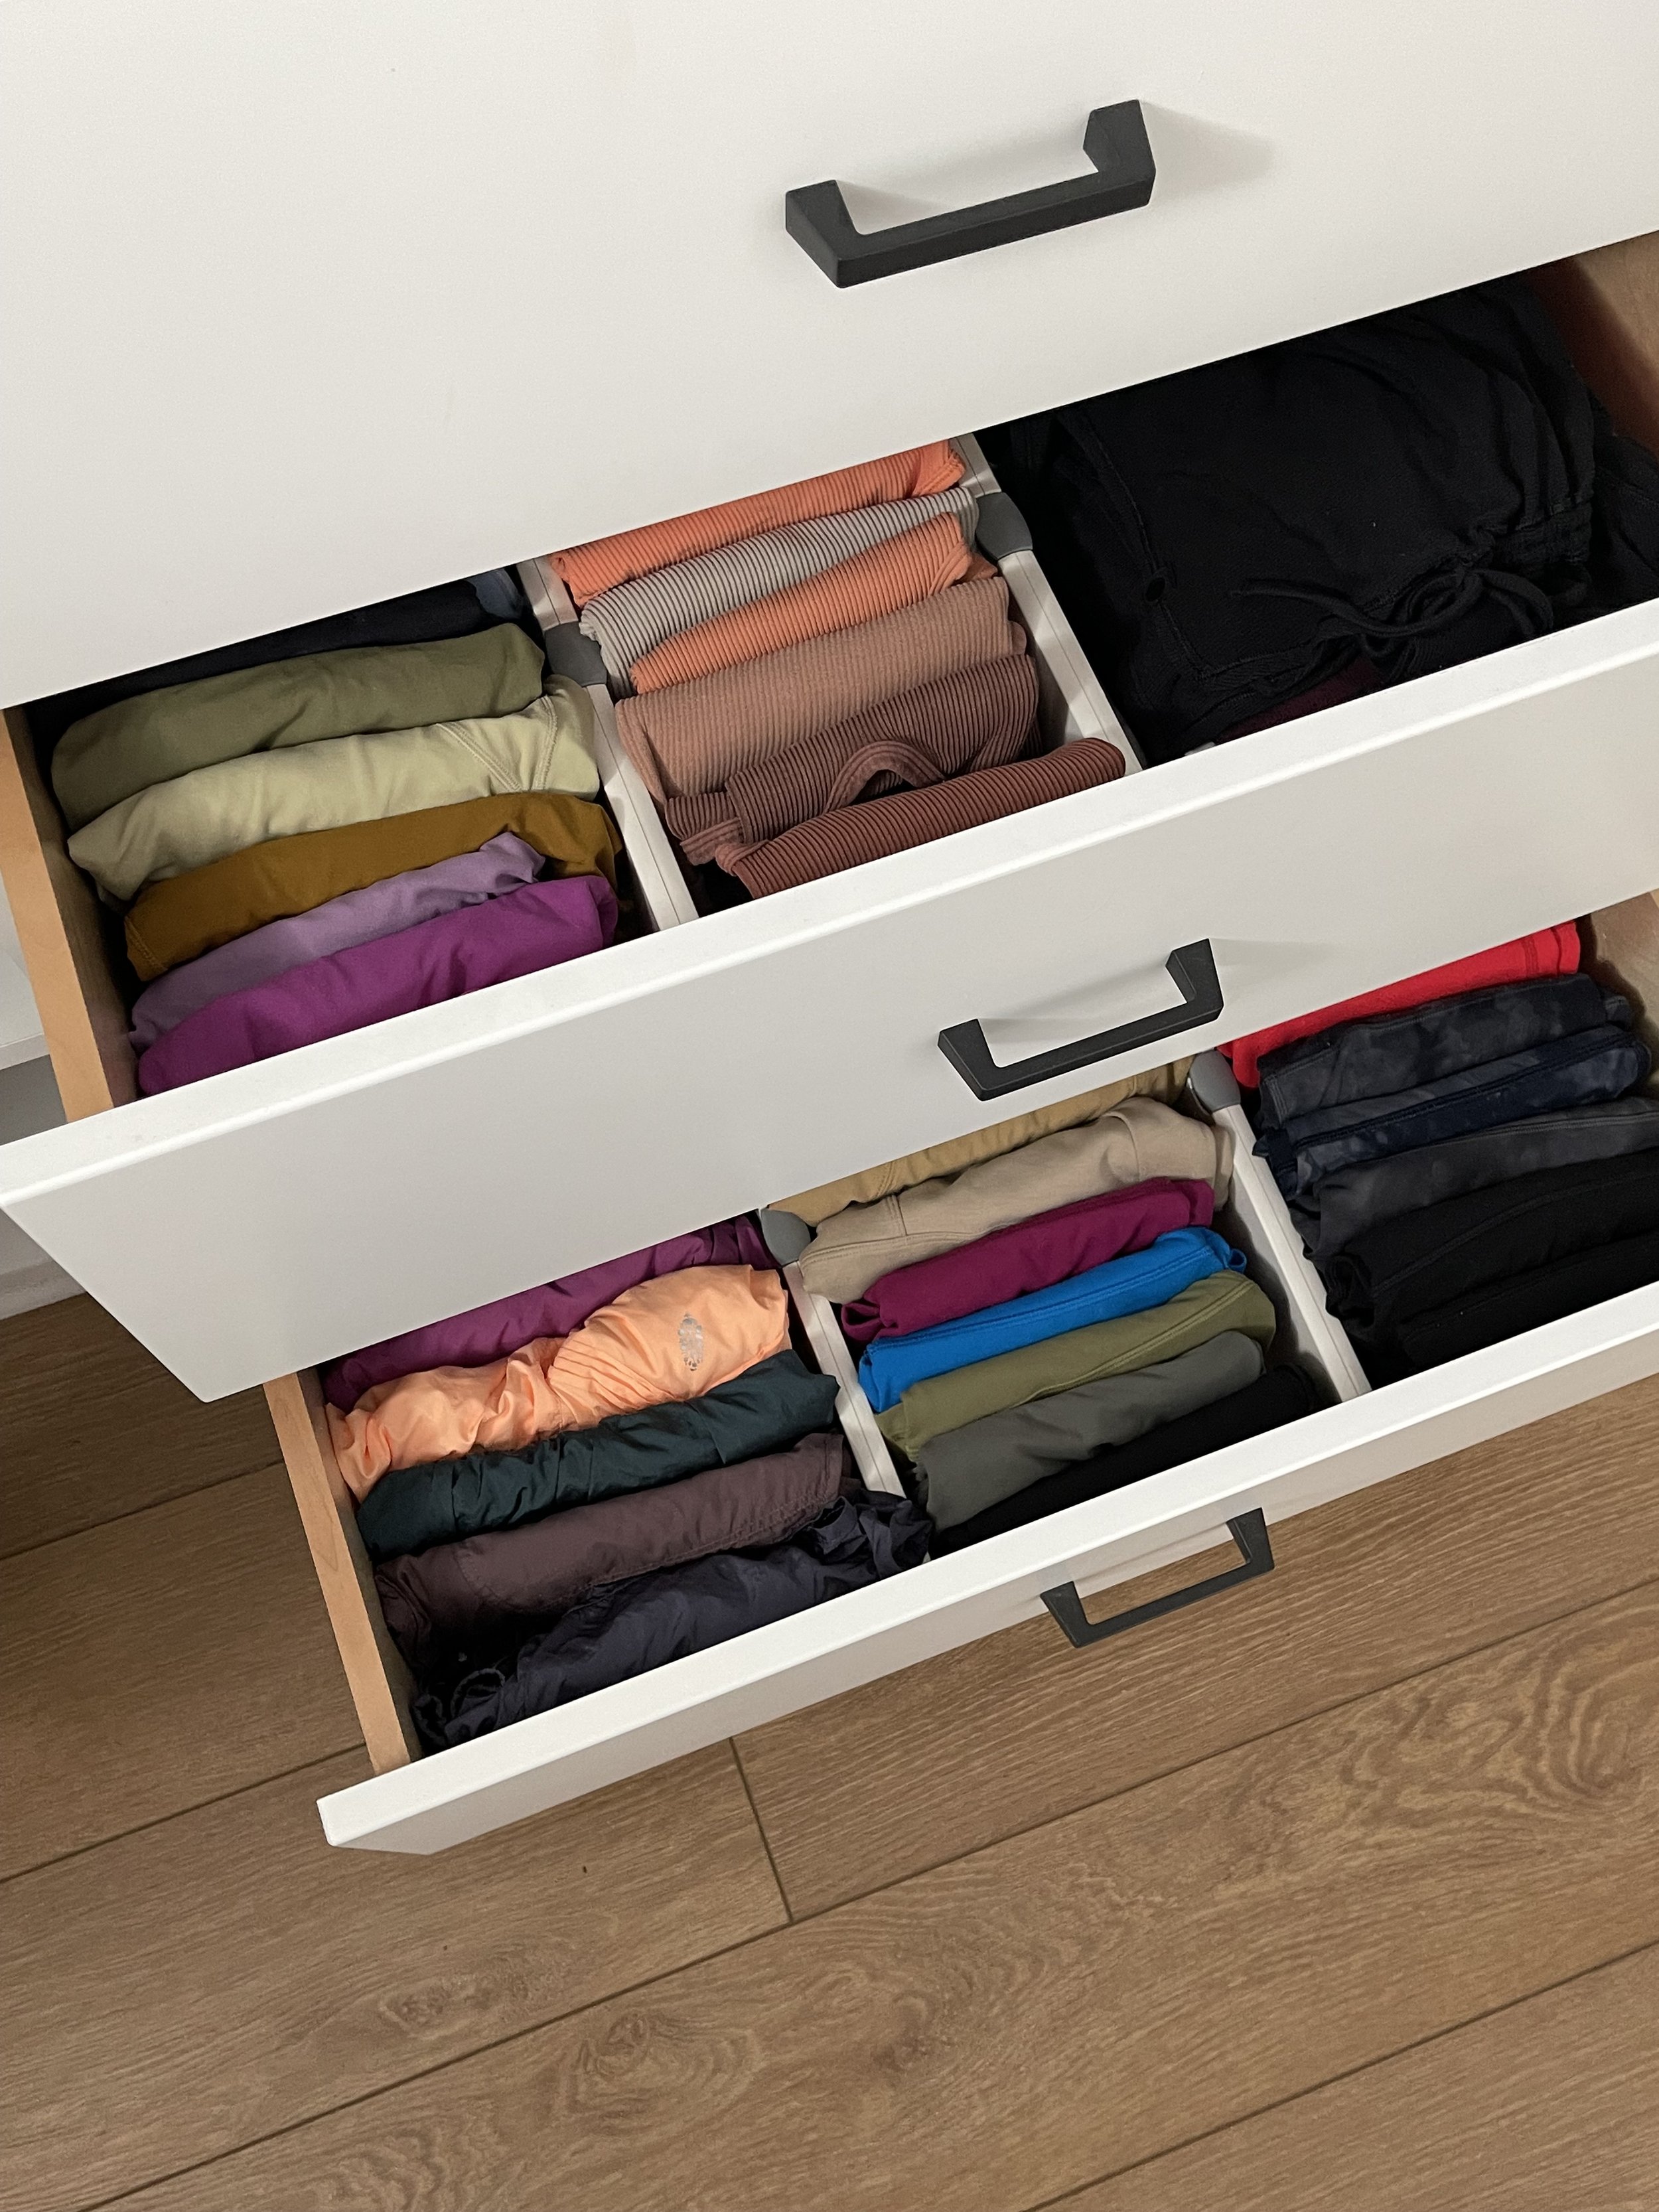 September Amazon Buys For The Home - bresheppard.com - drawer organizers.JPG